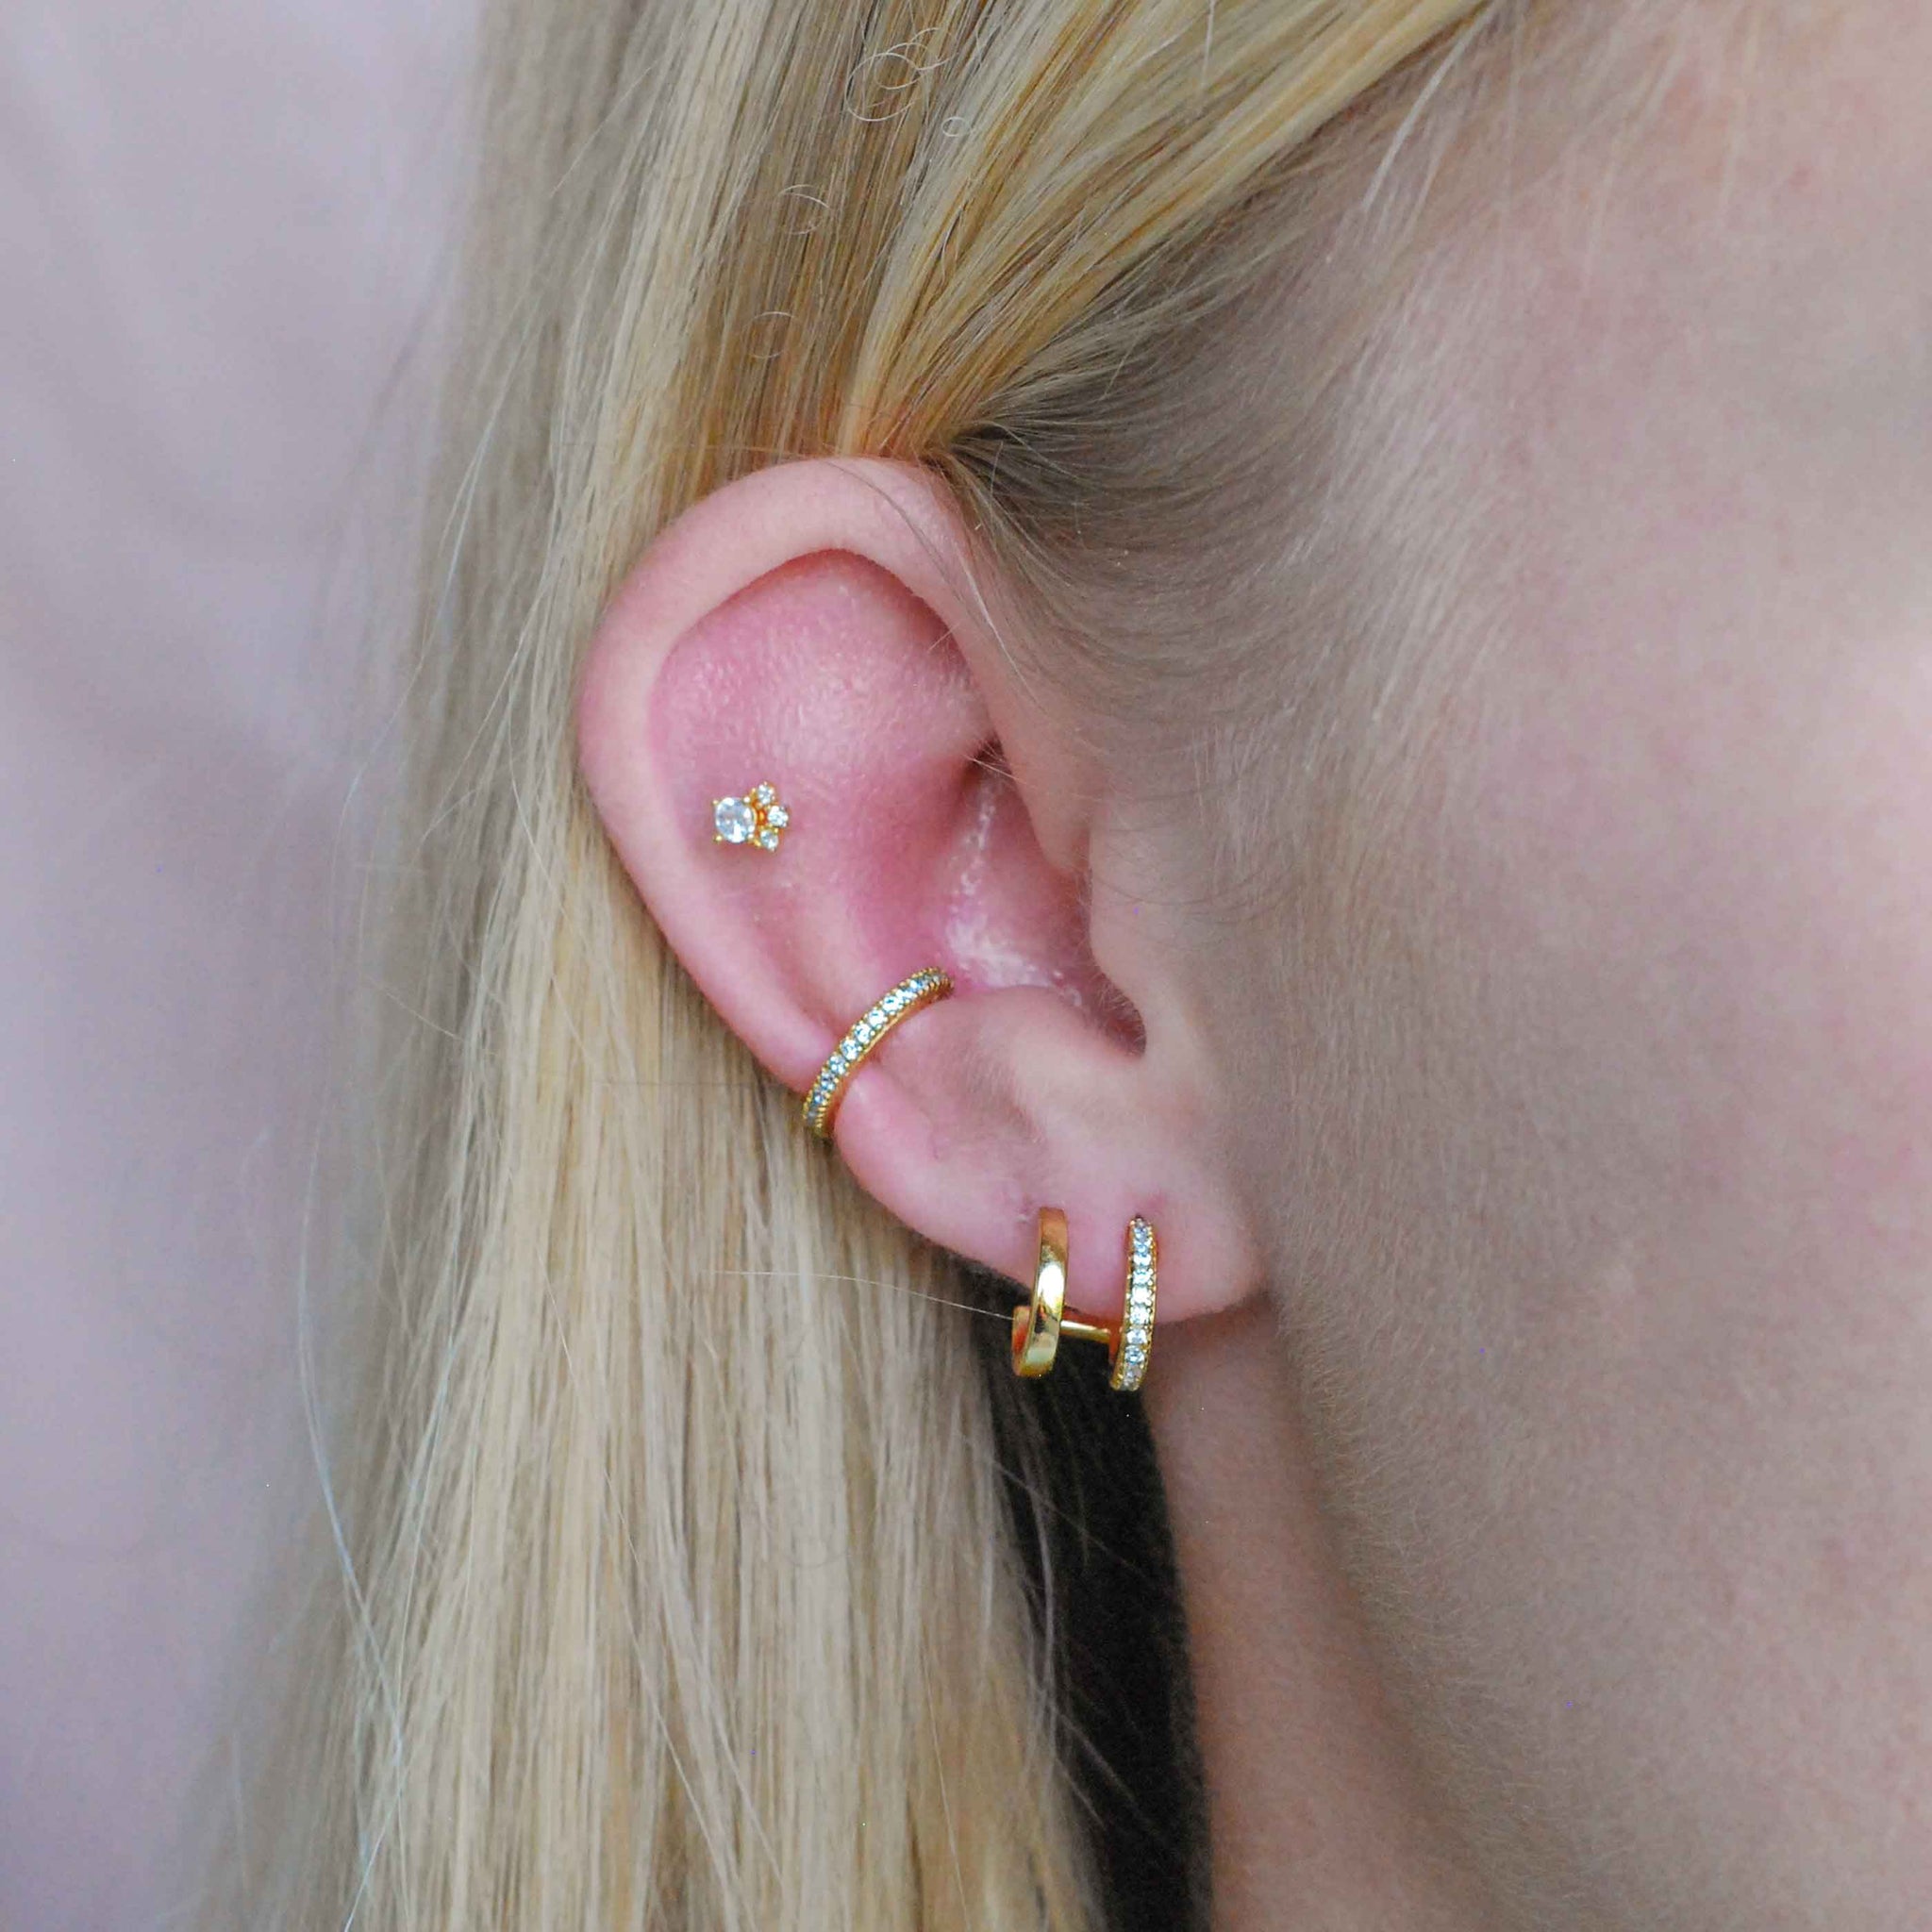 Illusion Stud Earrings in Gold worn with ear cuff